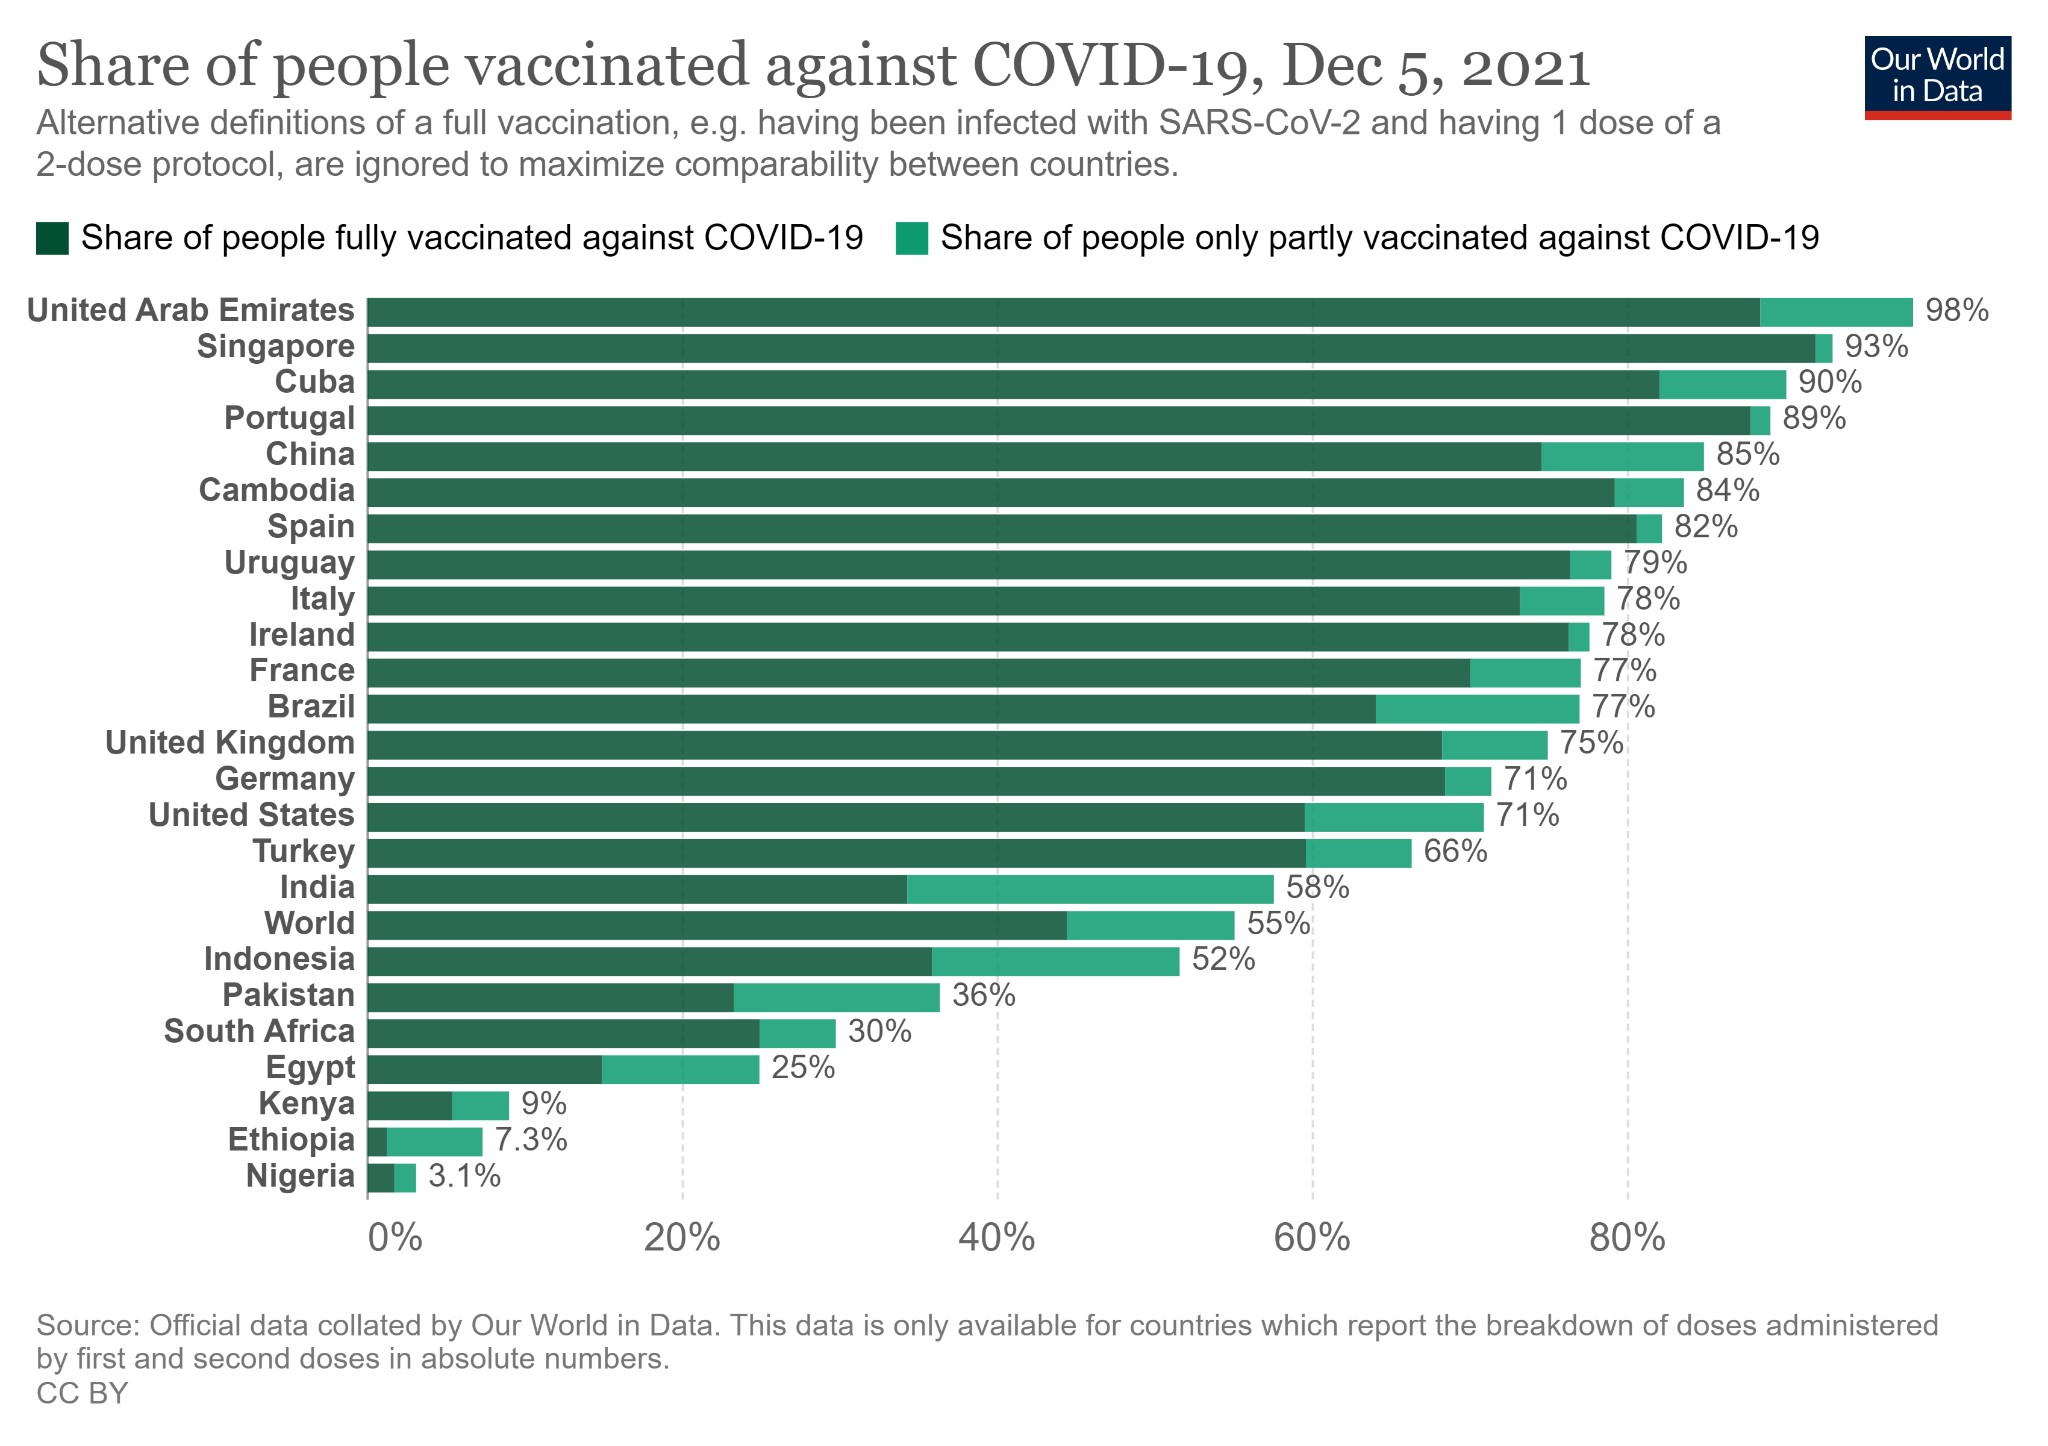 Share of people vaccinated against COVID-19